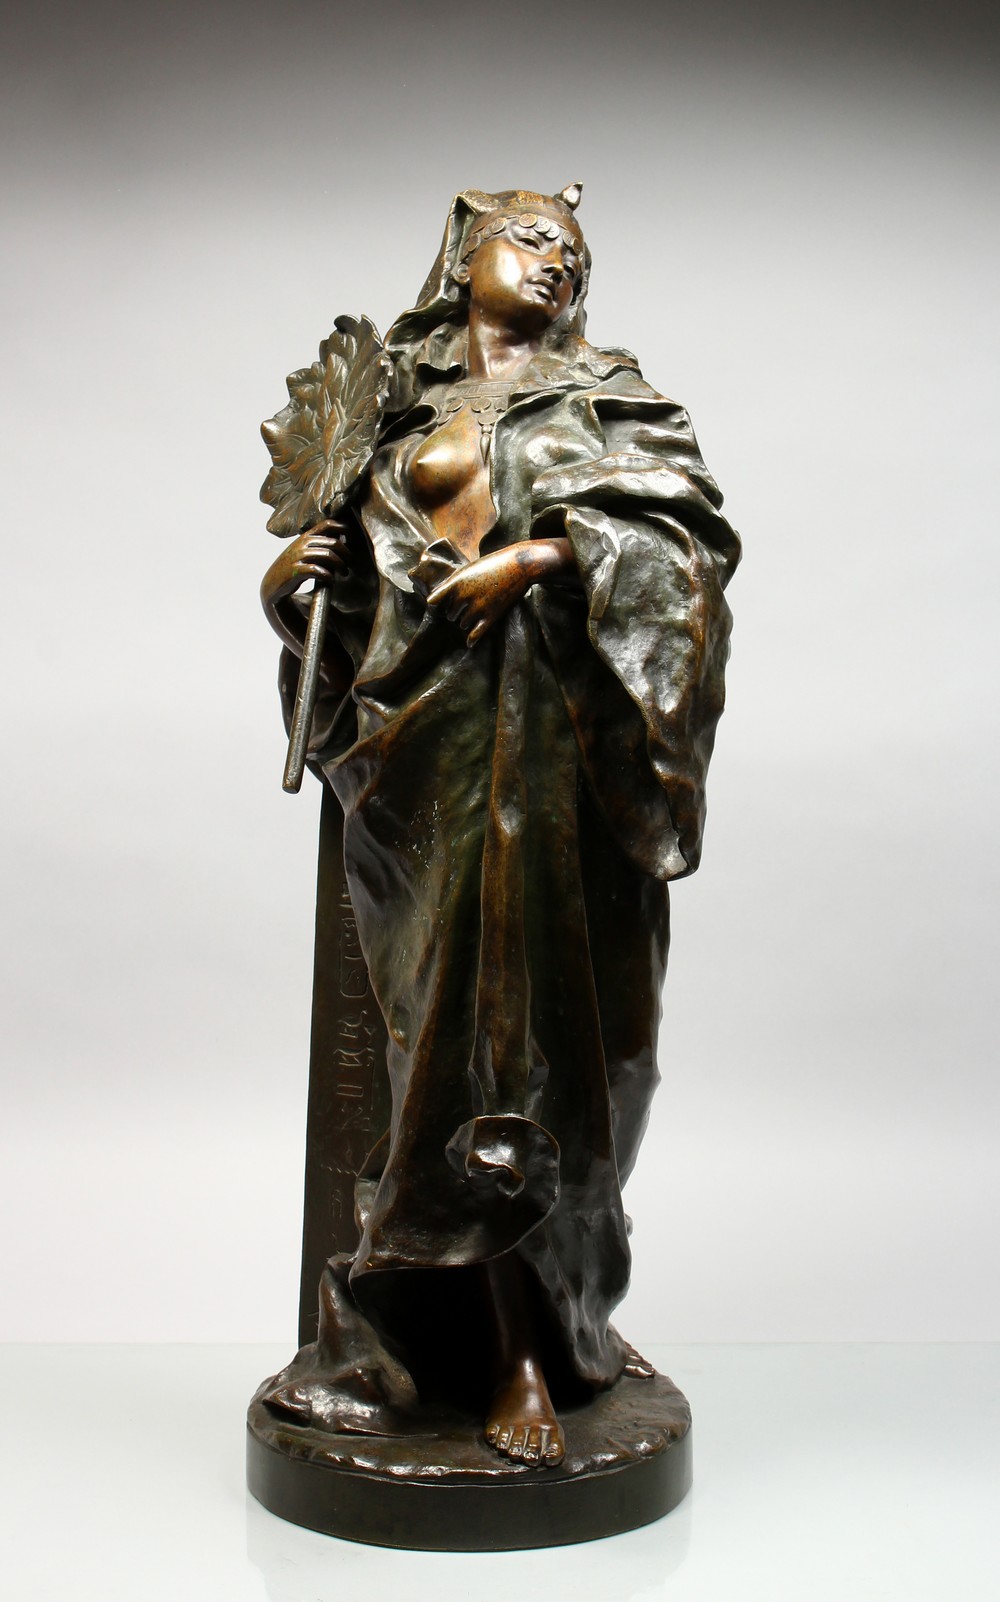 GASTON LEROUX (1854-1942) FRENCH A good Orientalist bronze of an Egyptian lady, possibly